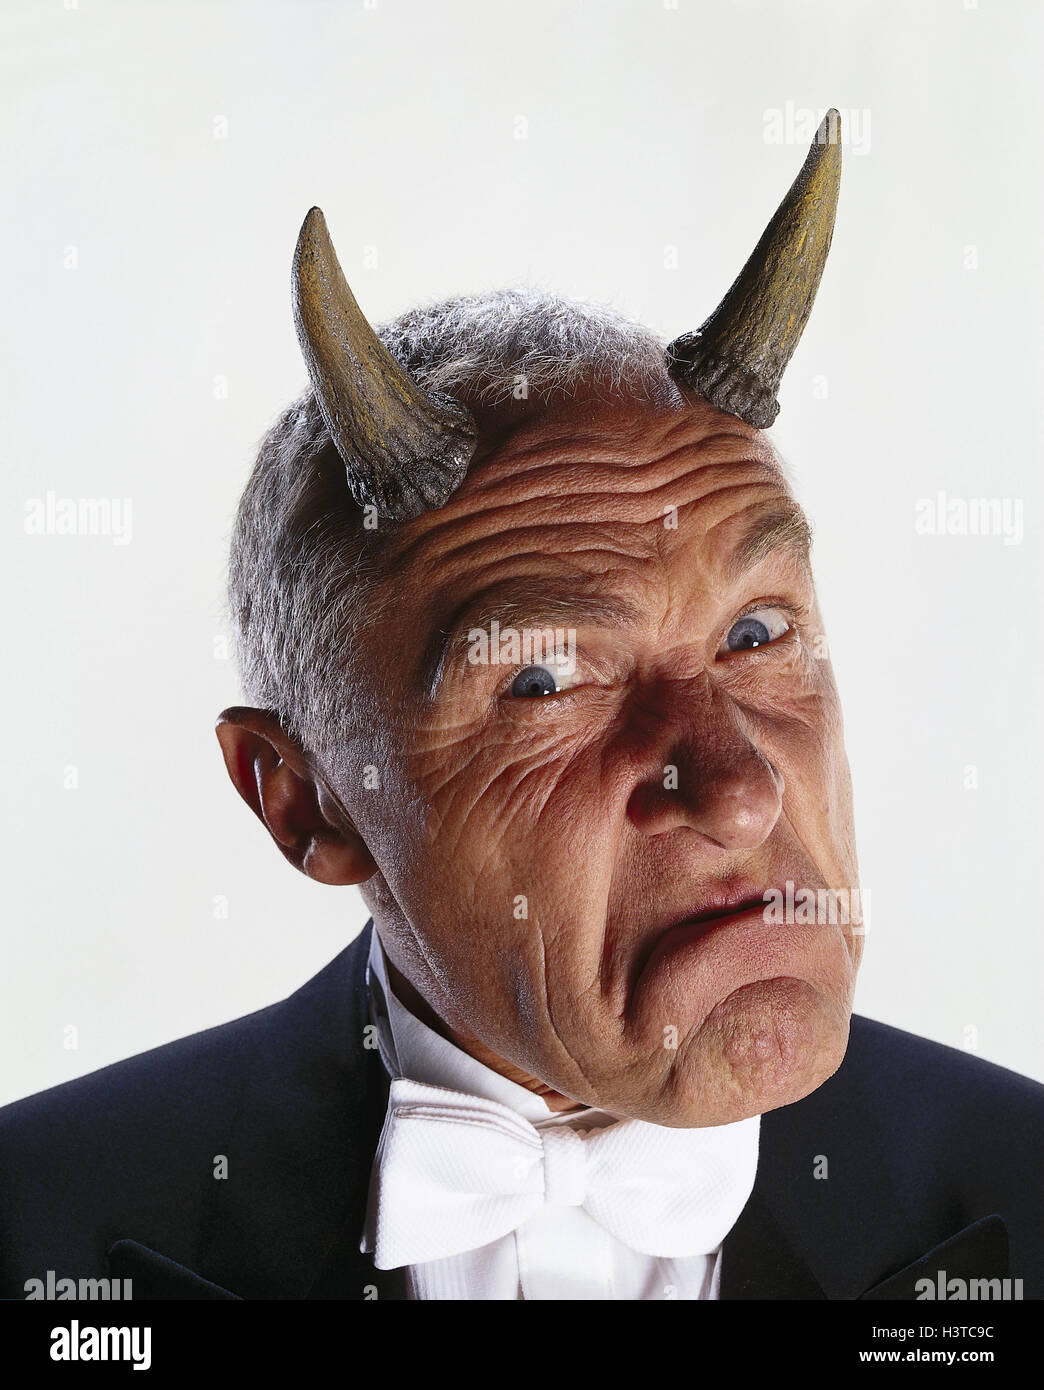 Man, "devil", head, horns, facial play, portrait, boss, lining, costume,  horn, nastily, maliciously, fiercely, unbelief, cunning, studio, copy space  Stock Photo - Alamy